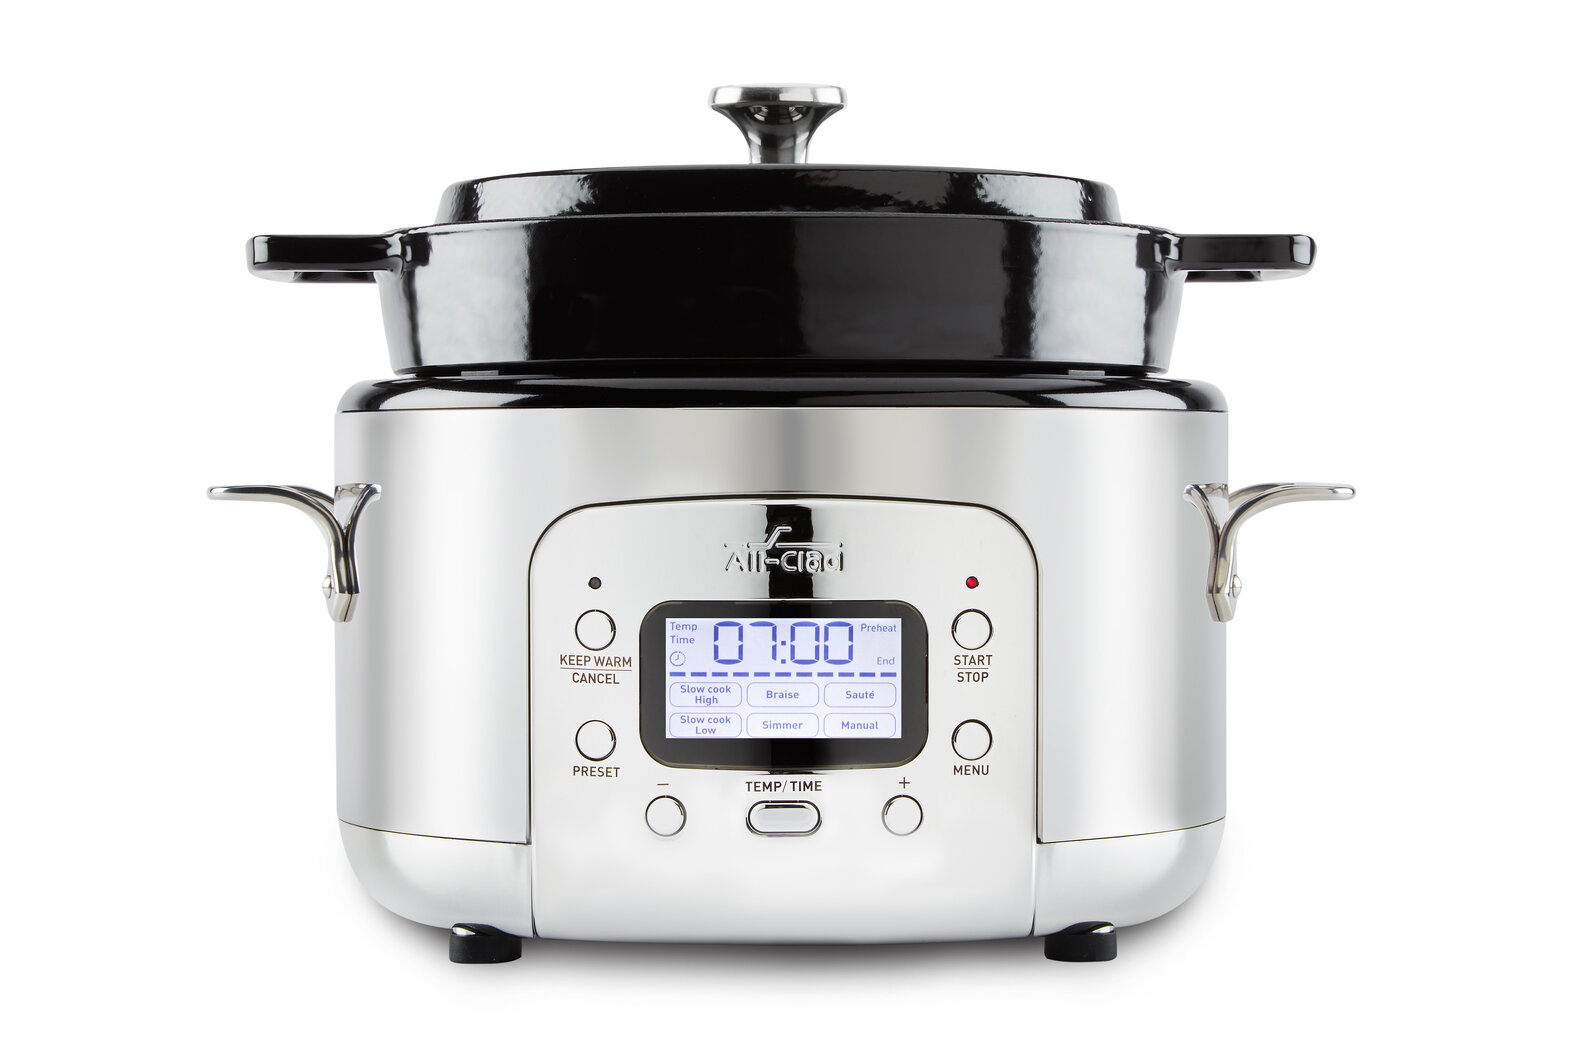 IMUSA IMUSA Electric Stainless Steel PTFE Nonstick Digital Pressure Cooker  5 Quarts - IMUSA